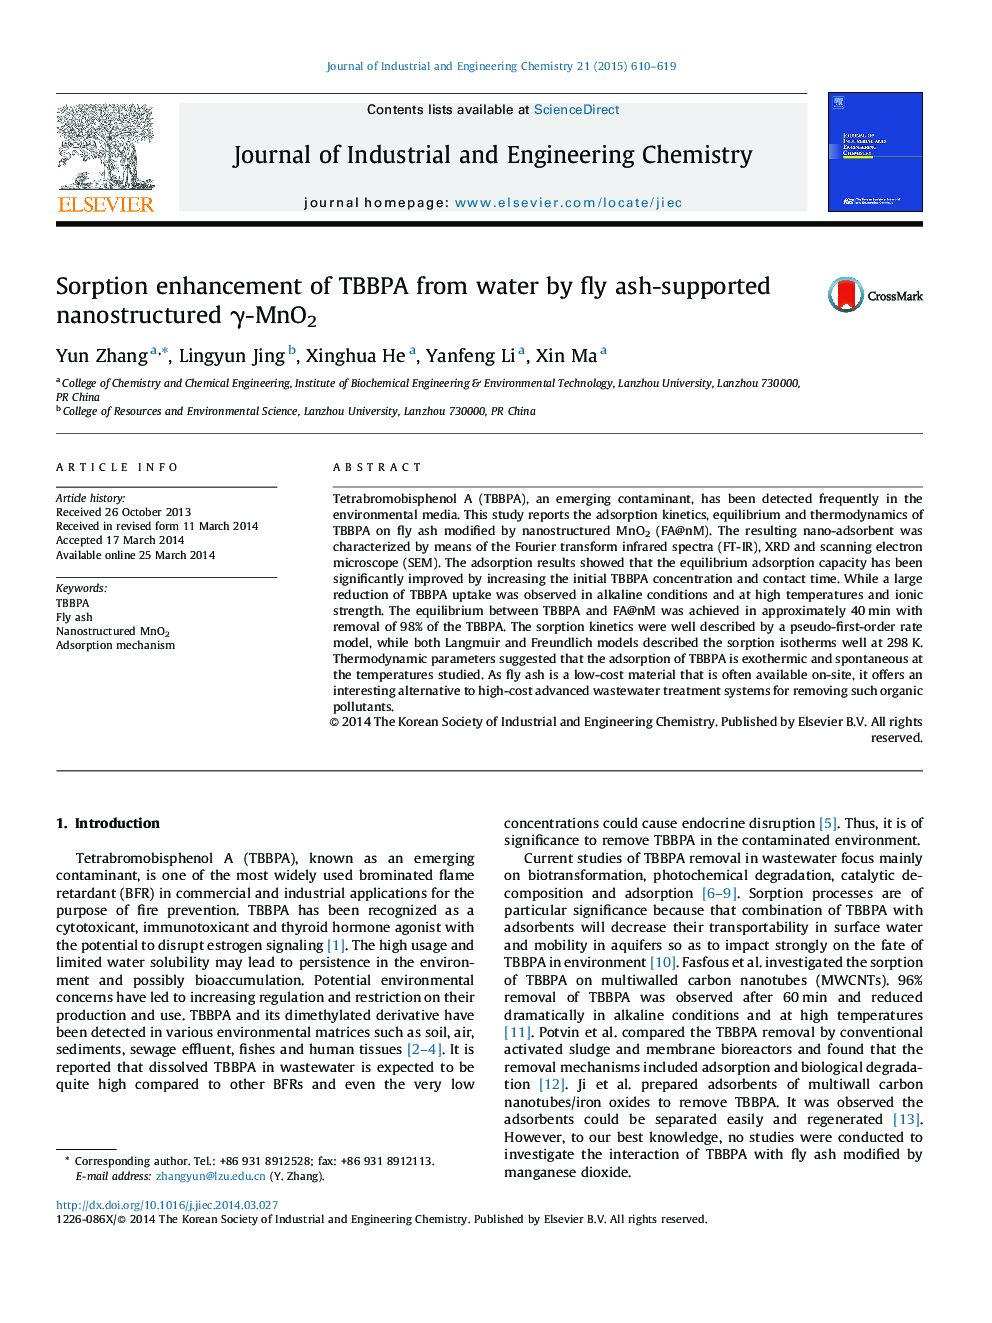 Sorption enhancement of TBBPA from water by fly ash-supported nanostructured γ-MnO2